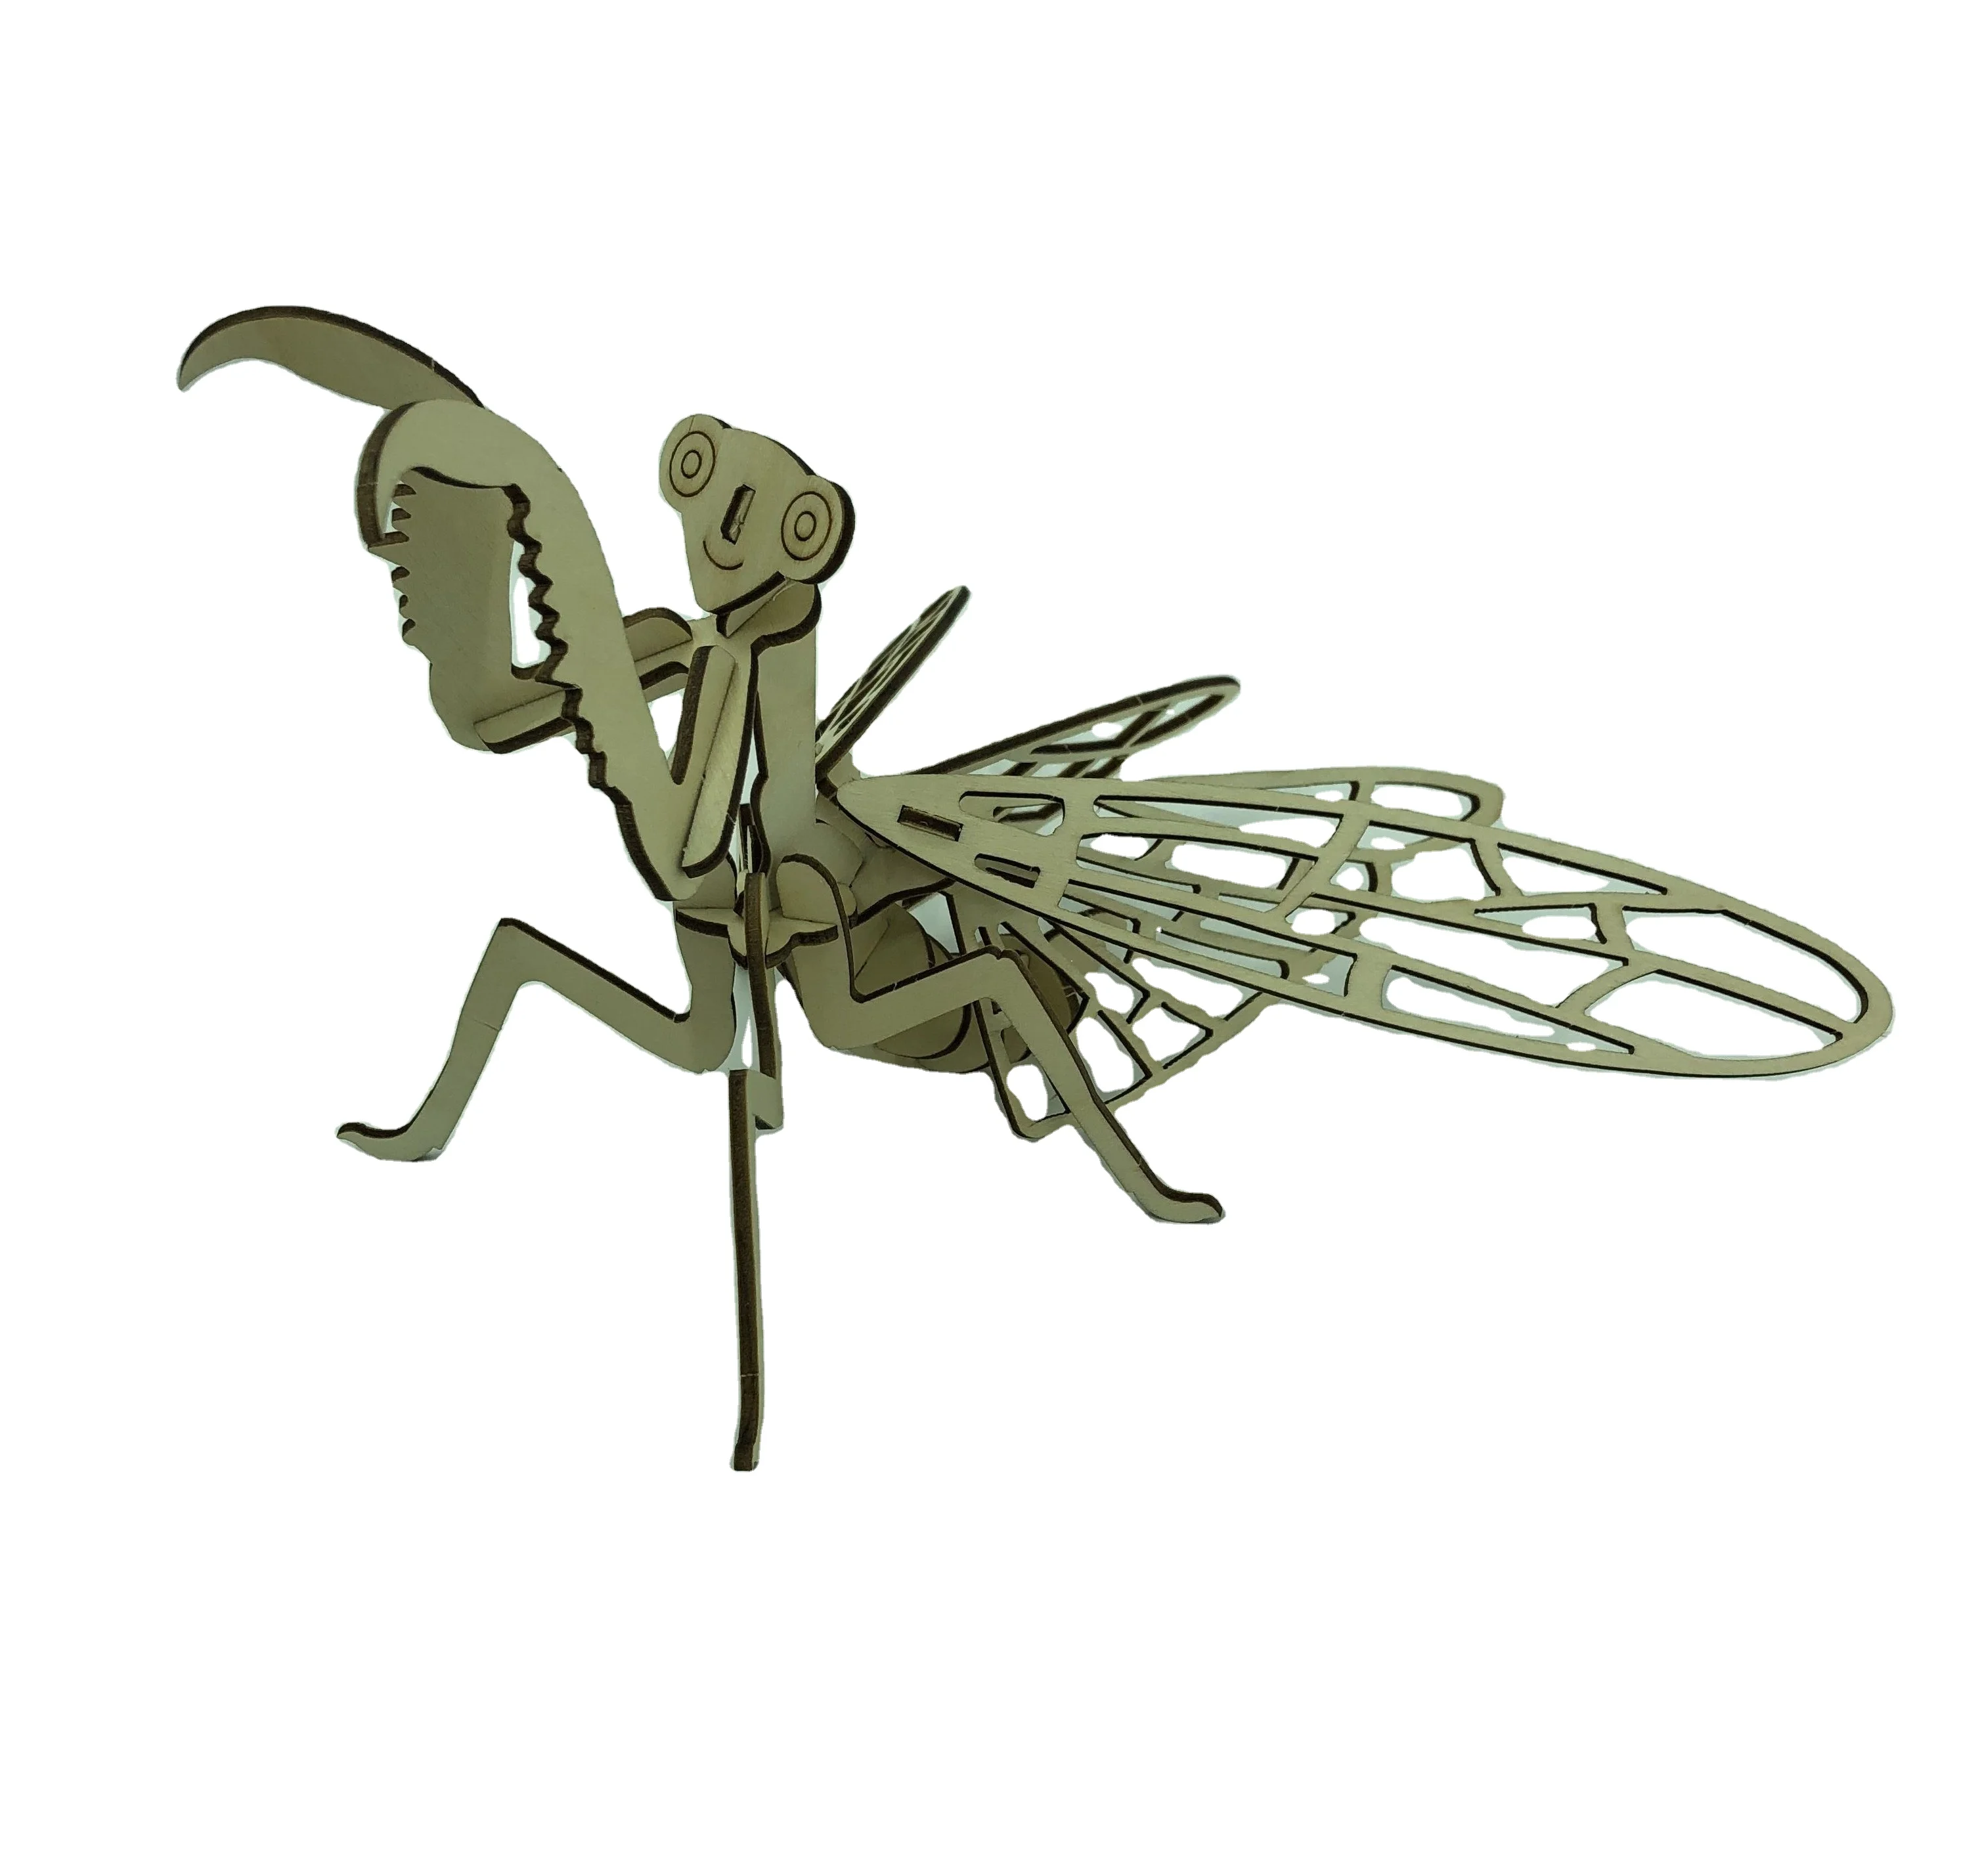 Mantis religiosa 3d madera kit insecto fangschrecke puzzle animal madera Puzzle 